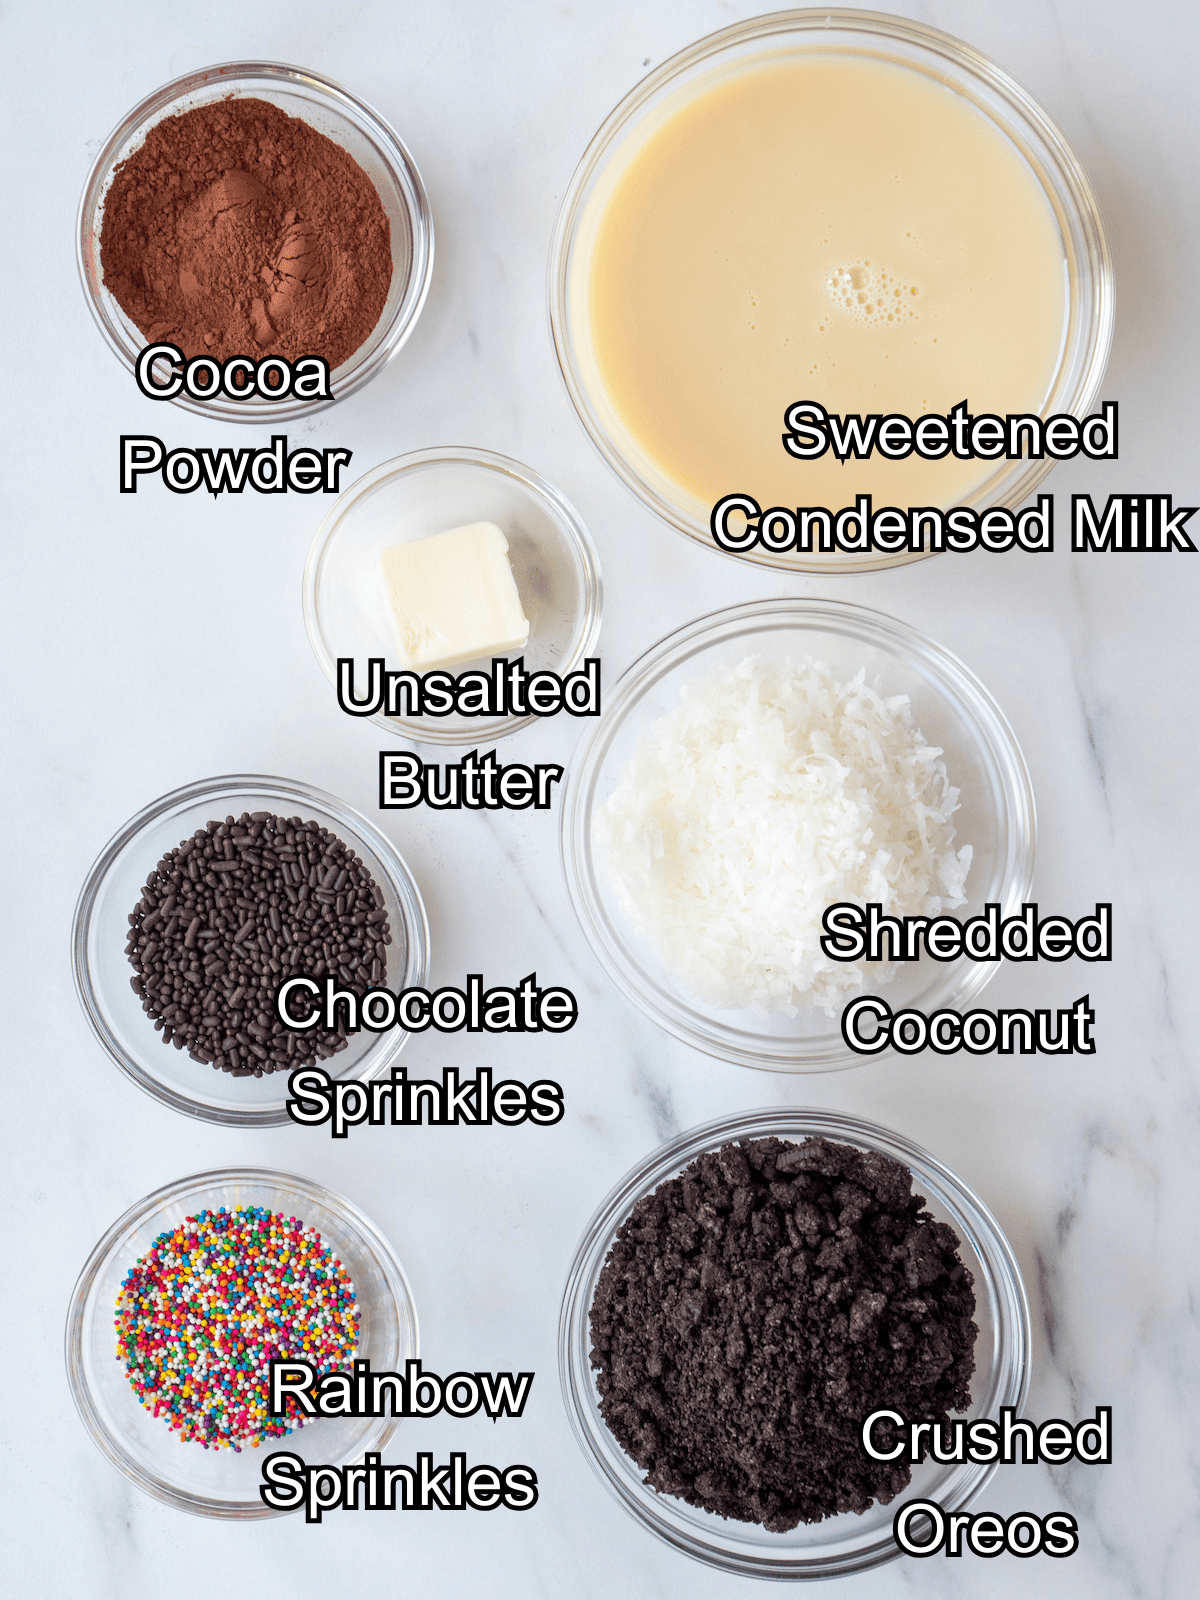 Mise-en-place with all the ingredients required to make brigadeiro